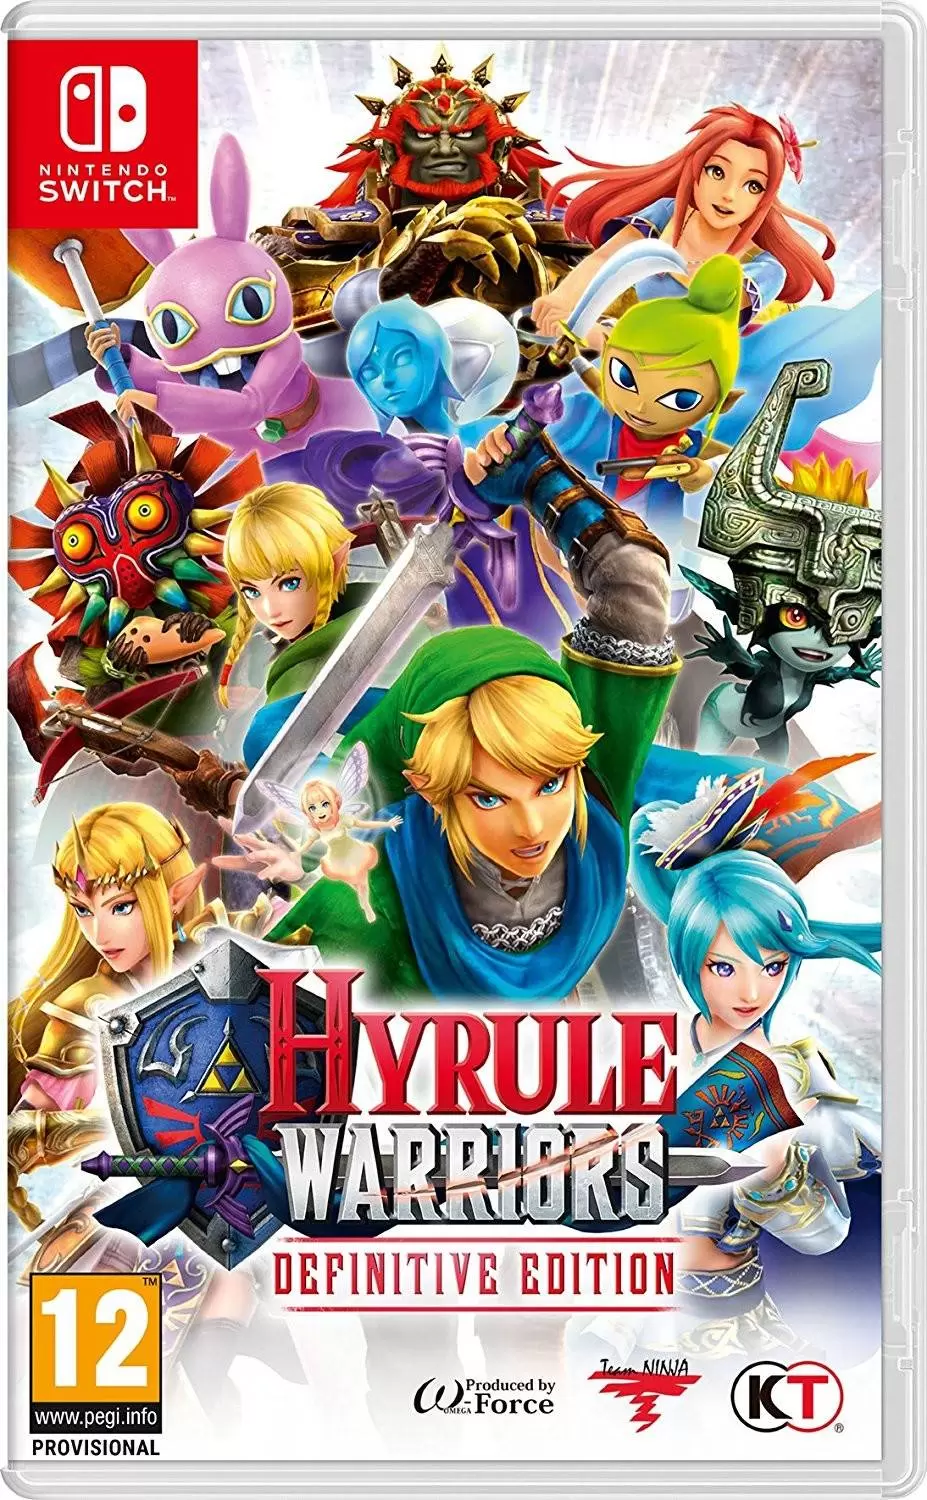 Nintendo Switch Games - Hyrule Warriors Definitive Edition